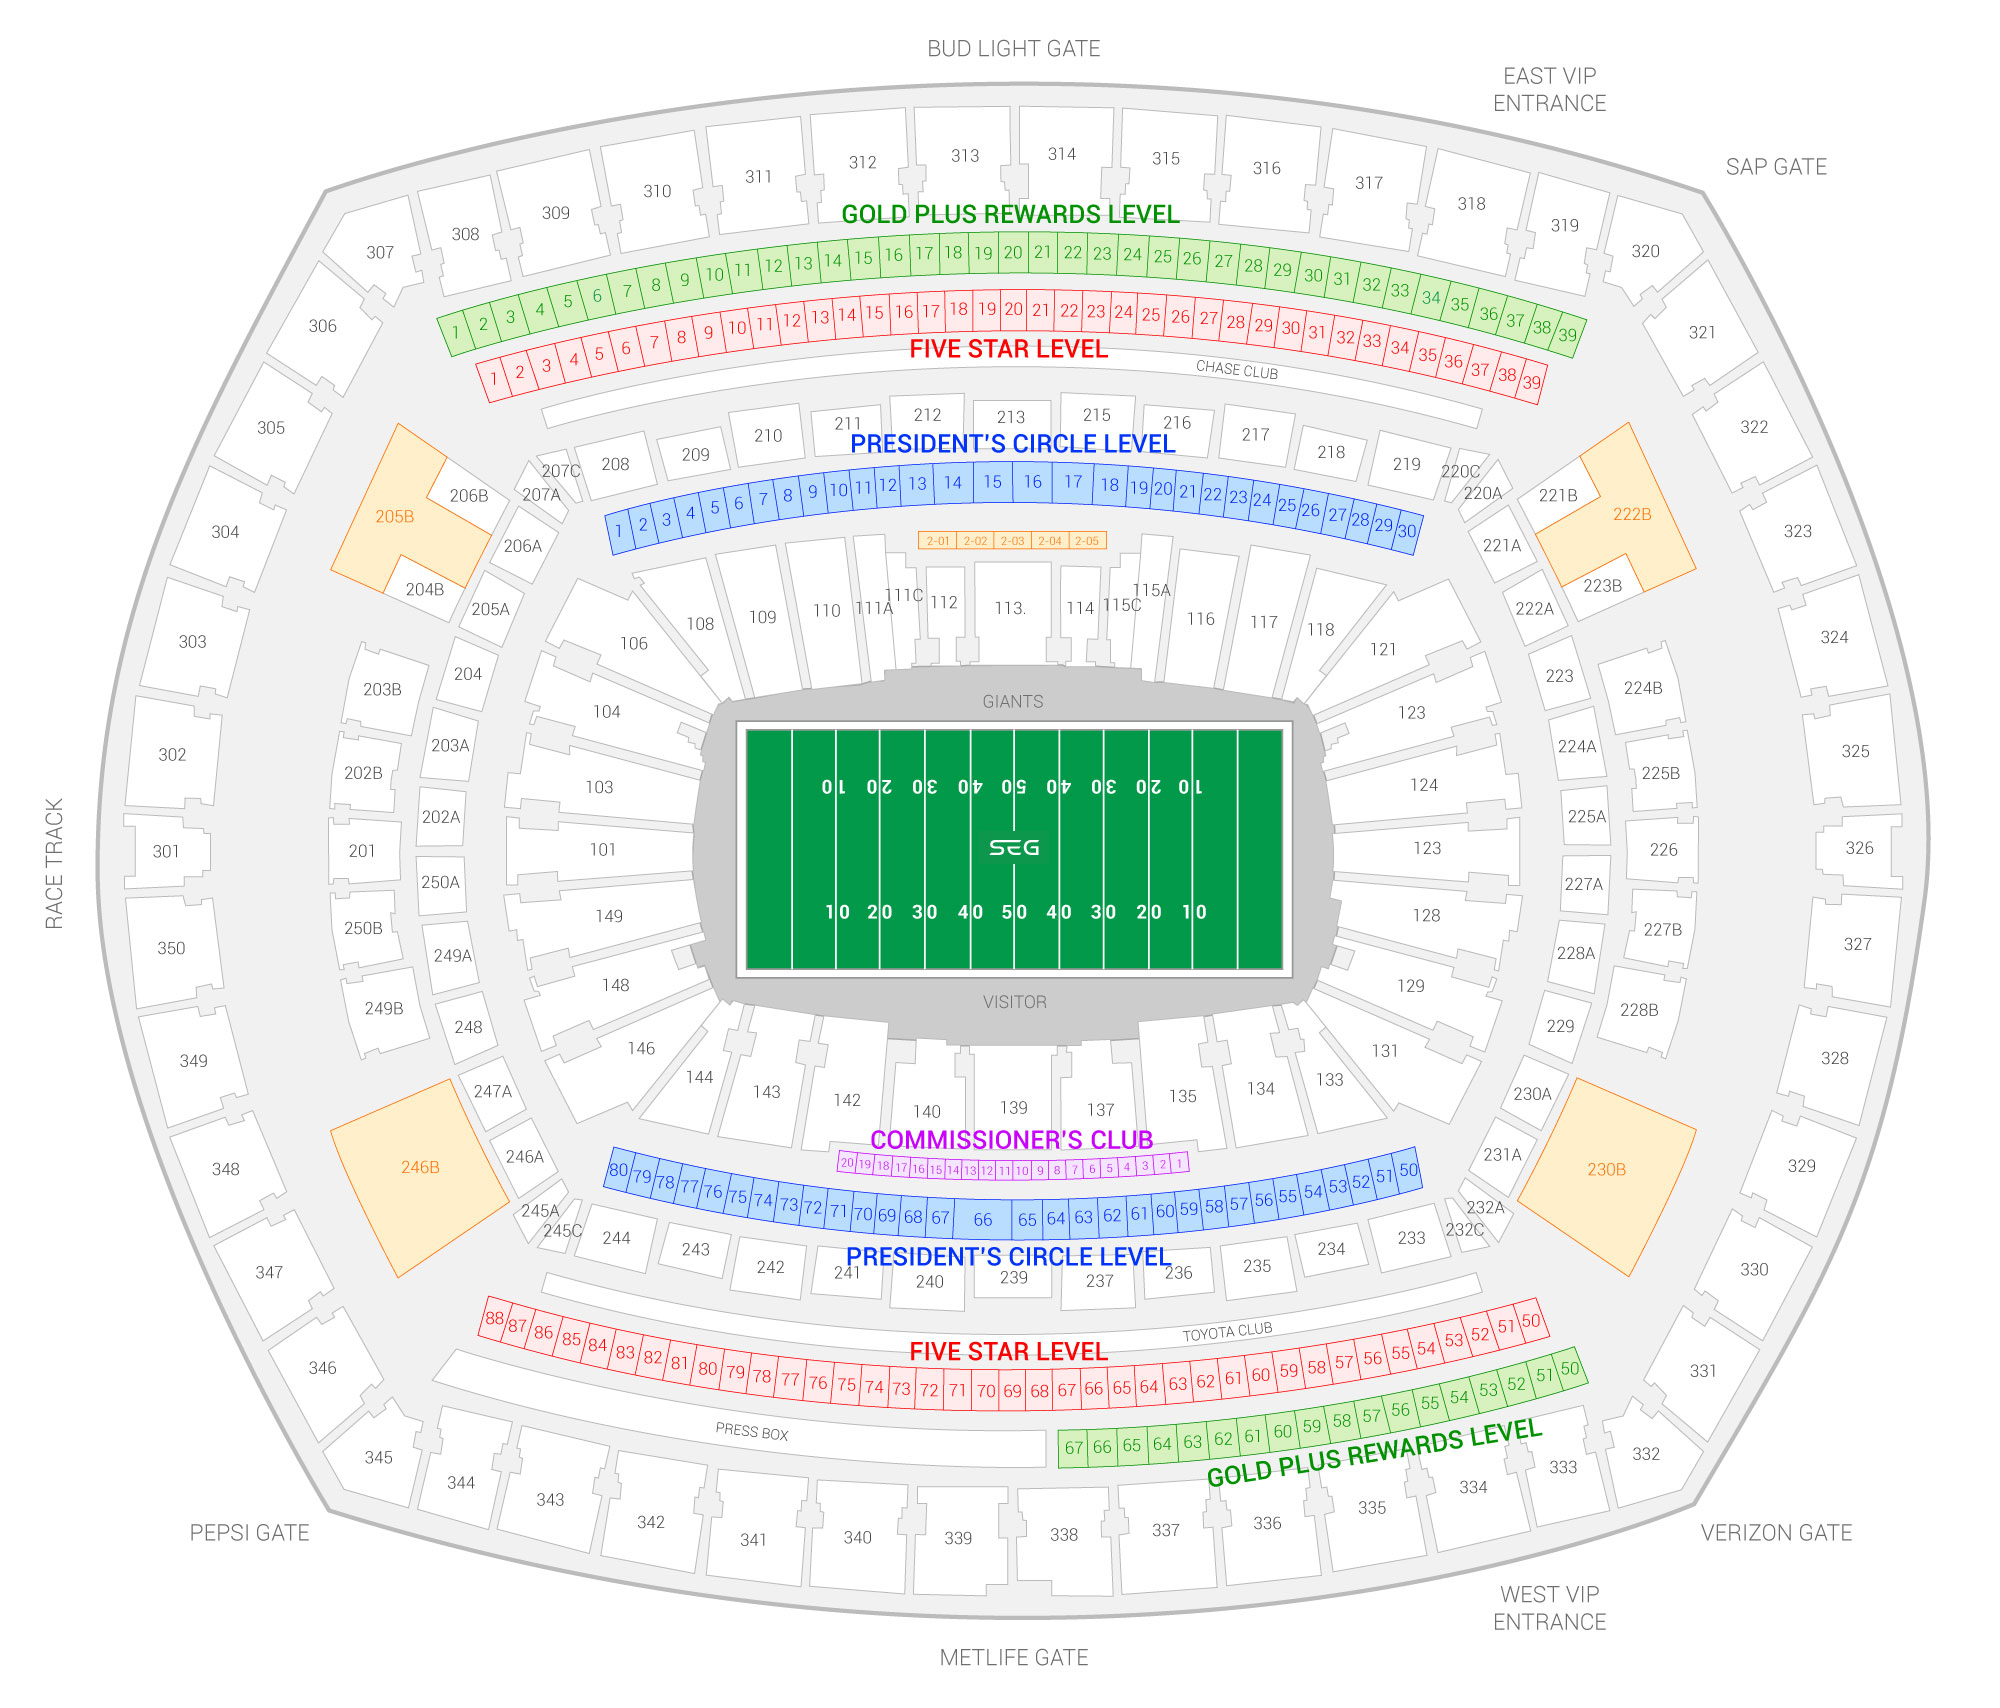 MetLife Stadium / Army Black Knights vs Navy Midshipmen Suite Map and Seating Chart